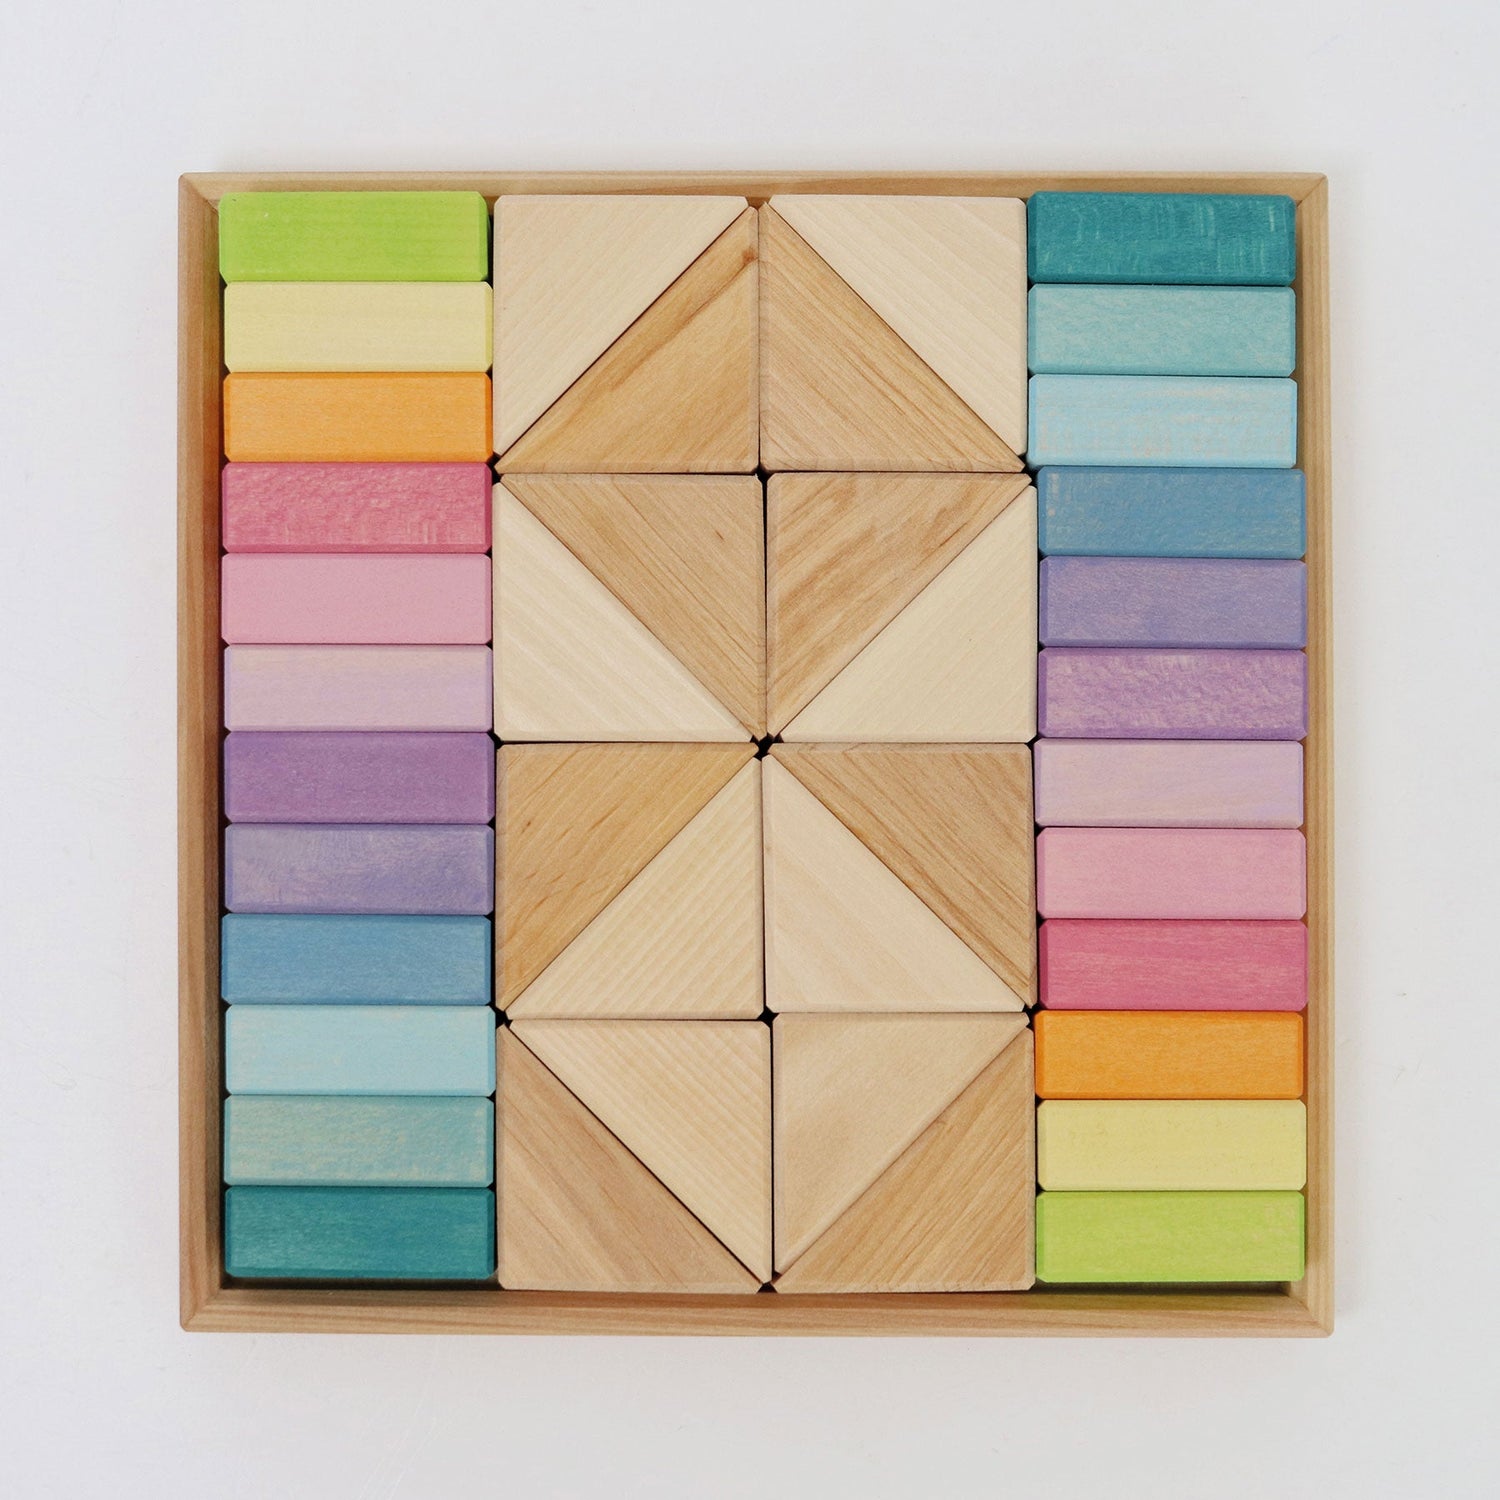 GRIMM'S | BUILDING SET PASTEL DUO by GRIMM'S WOODEN TOYS - The Playful Collective